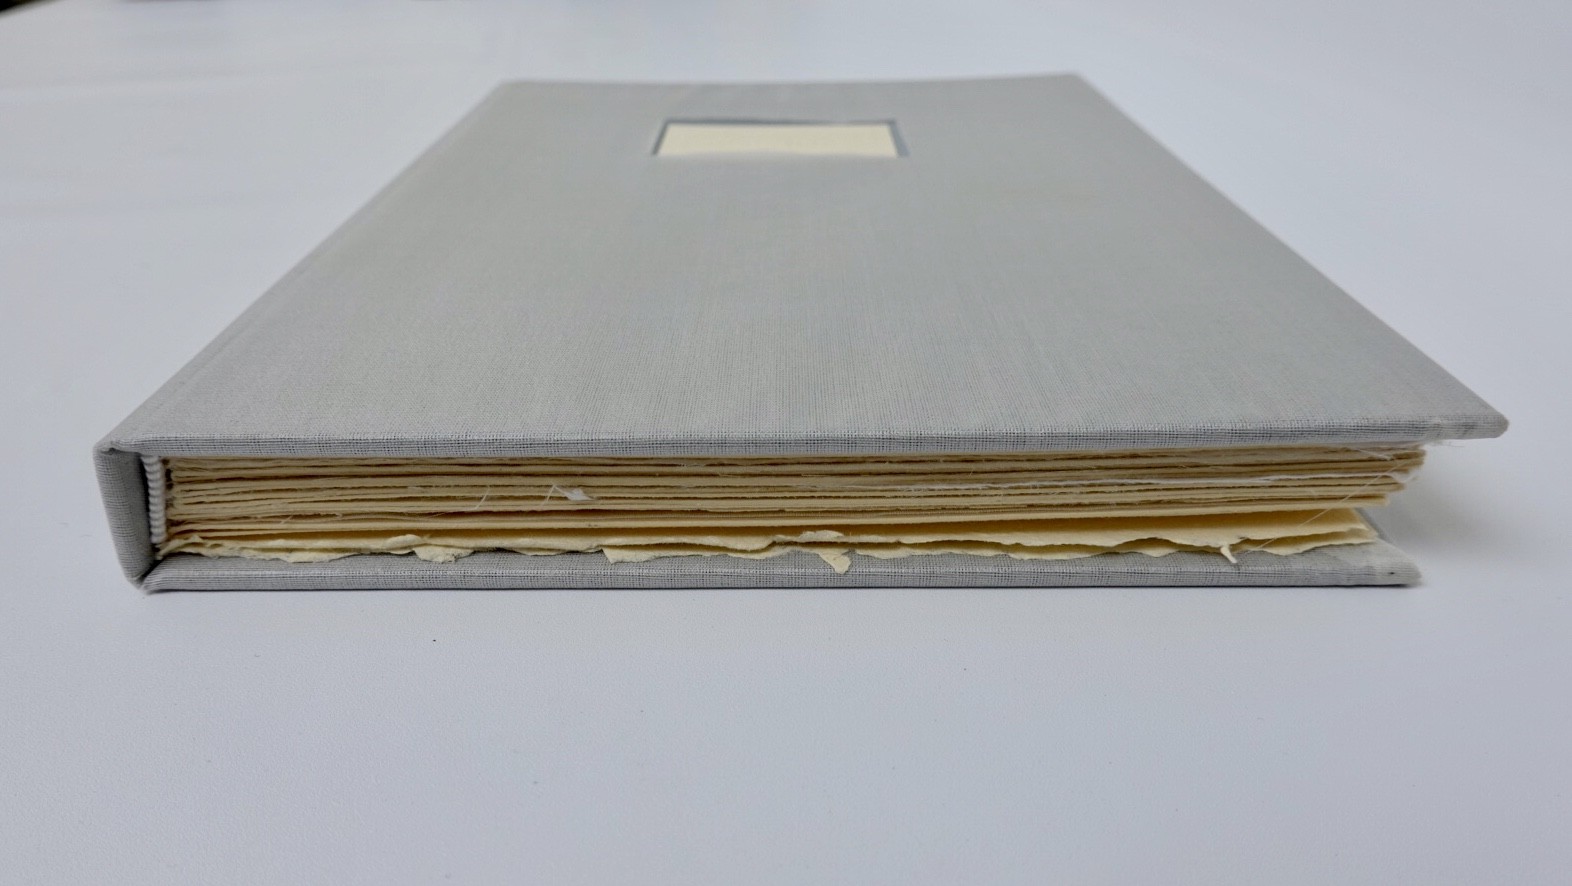 Bottom edge of book showing deckled edges and Juan silk covered book cloth